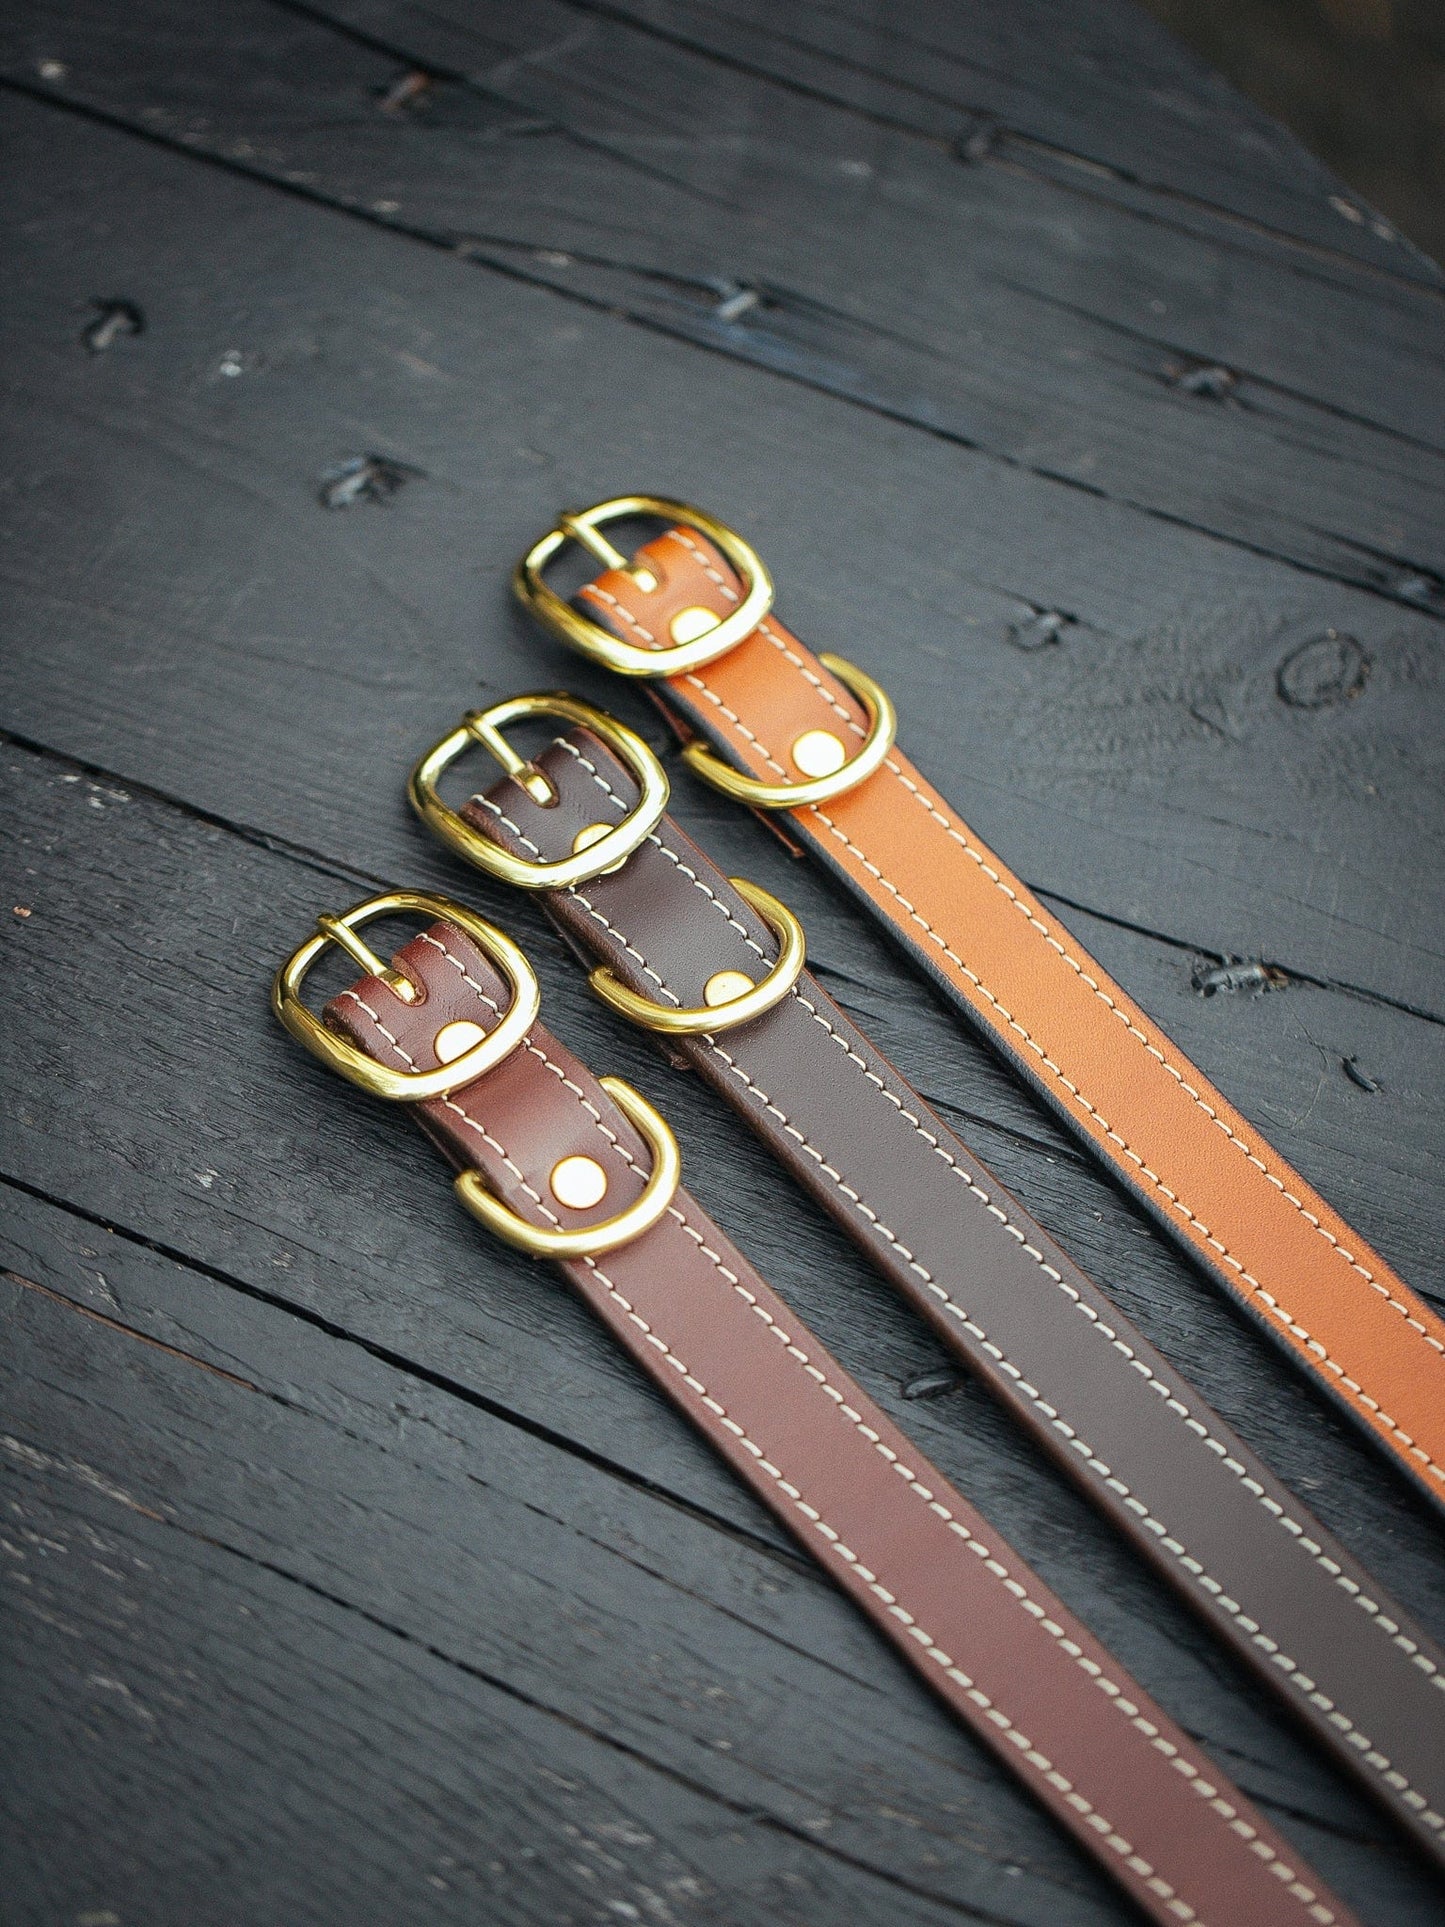 The Real McCaul Leathergoods Pet Collars & Harnesses Rancher Dog Collar - 25mm - Tan Australian Made Australian Owned Australian Made Dog Collar - Solid Leather with Brass